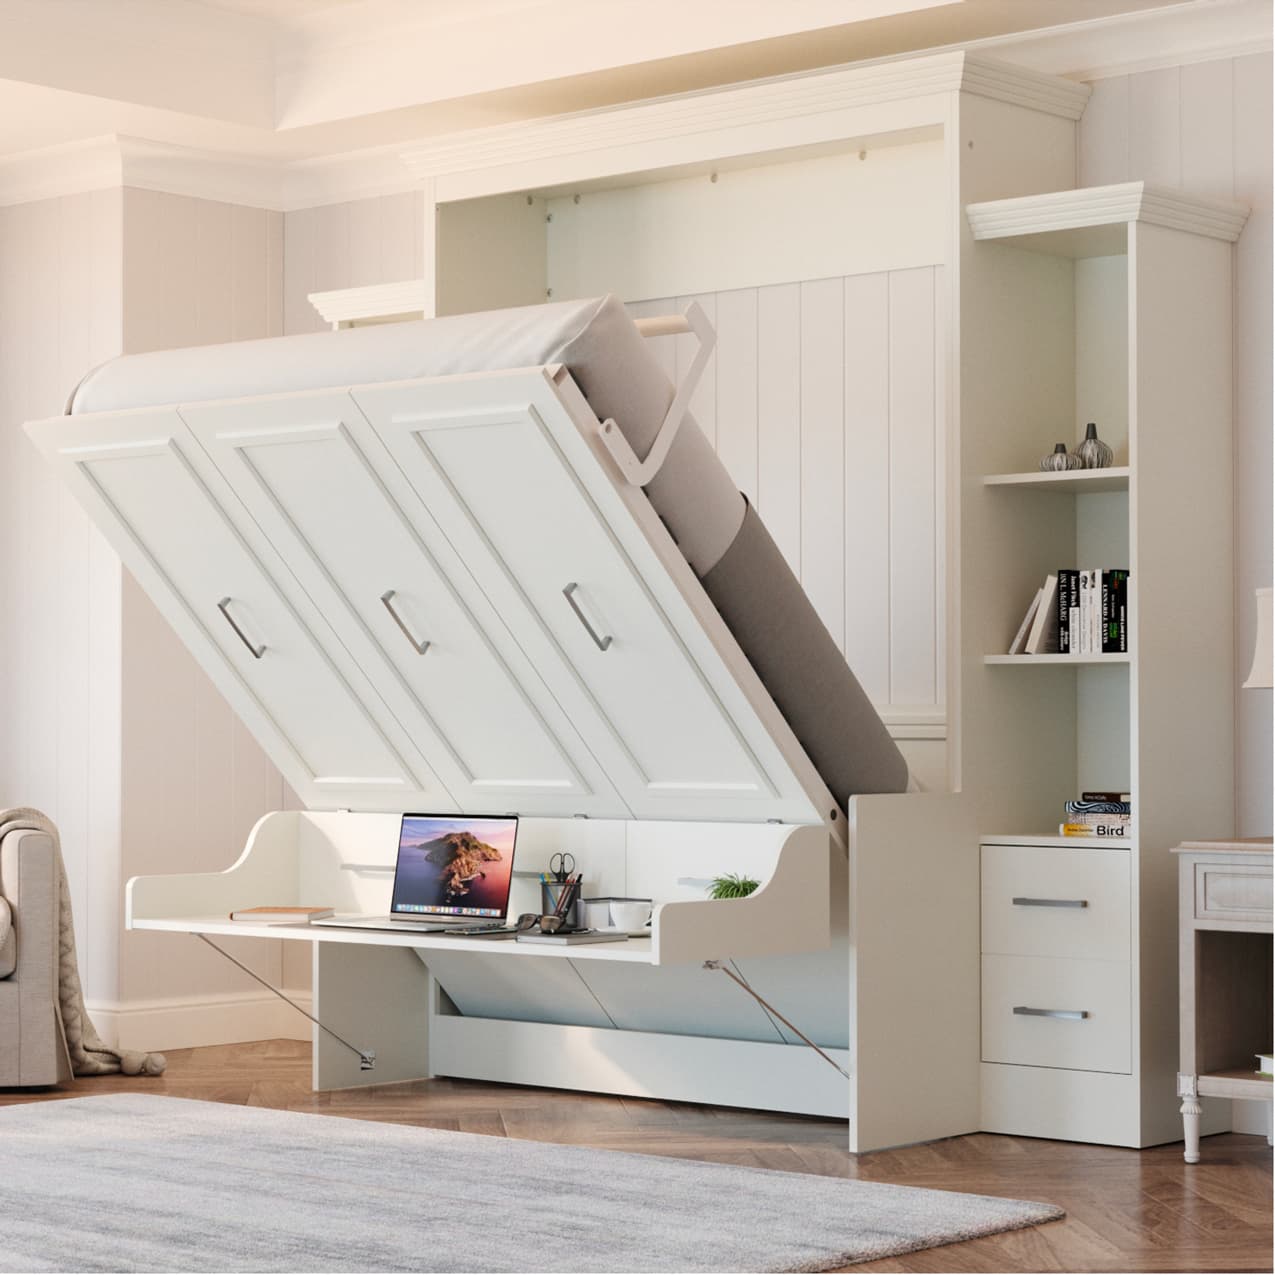 aegis queen murphy bed opening to show the desk stays level when the bed is open home office guest bed hidden hideaway hide-a-way hide away